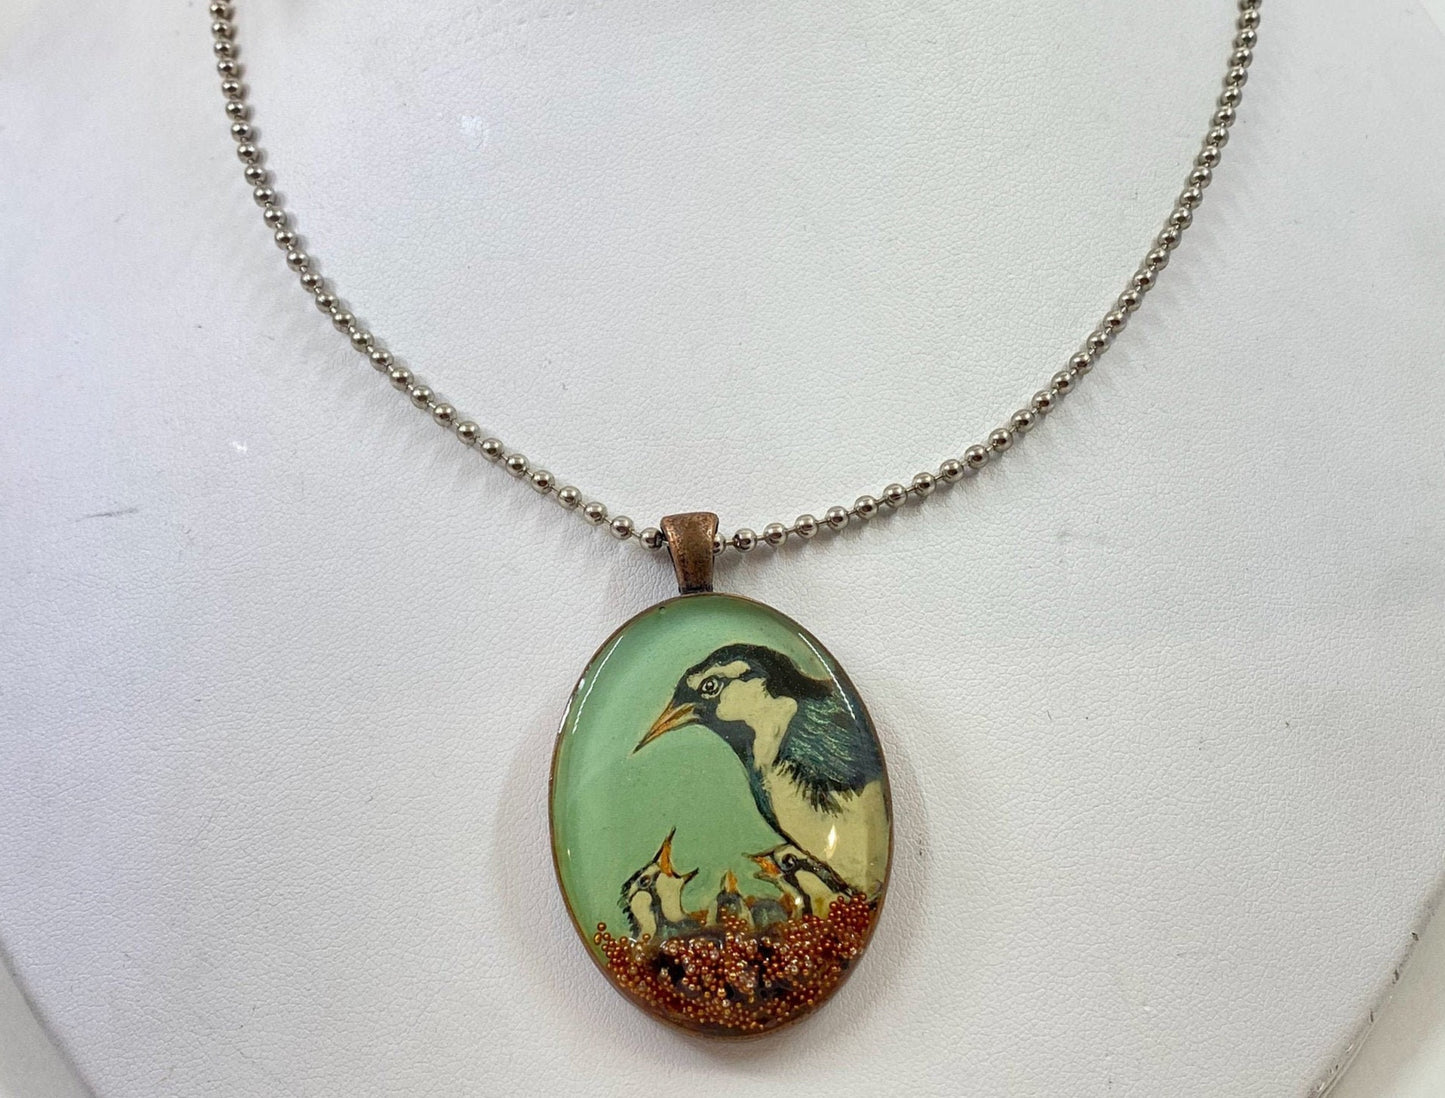 Mother bird and baby bird pendant. Hand painted bird design, accented with crystals and beads. Brass frame and 14 karat gold filled chain.